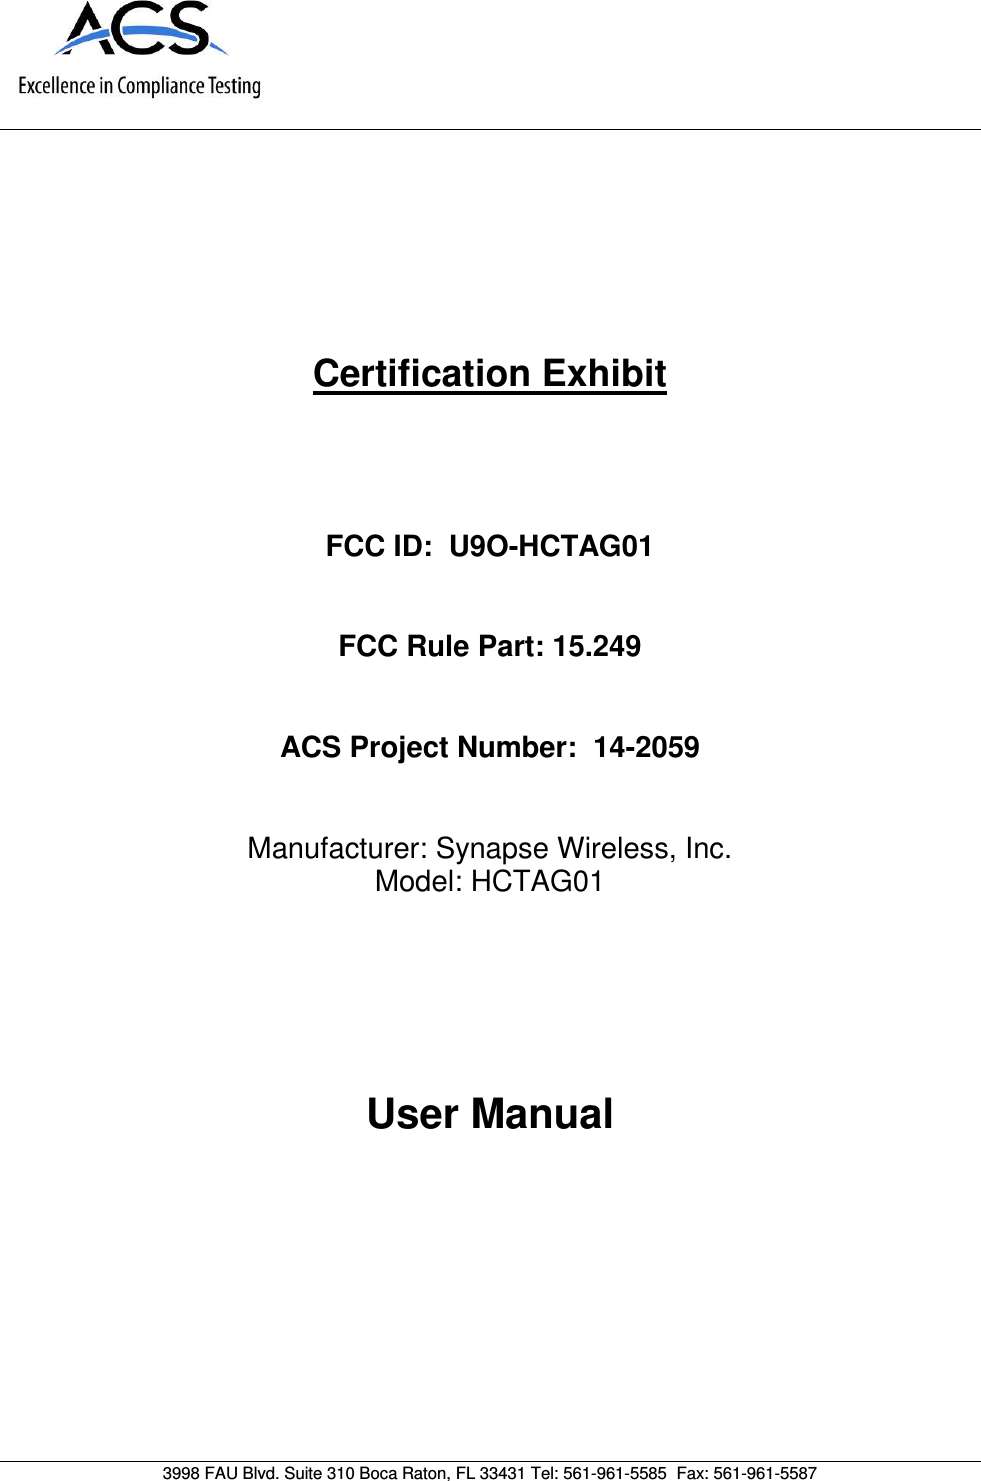      Certification Exhibit     FCC ID:  U9O-HCTAG01   FCC Rule Part: 15.249   ACS Project Number:  14-2059   Manufacturer: Synapse Wireless, Inc. Model: HCTAG01     User Manual   3998 FAU Blvd. Suite 310 Boca Raton, FL 33431 Tel: 561-961-5585  Fax: 561-961-5587 